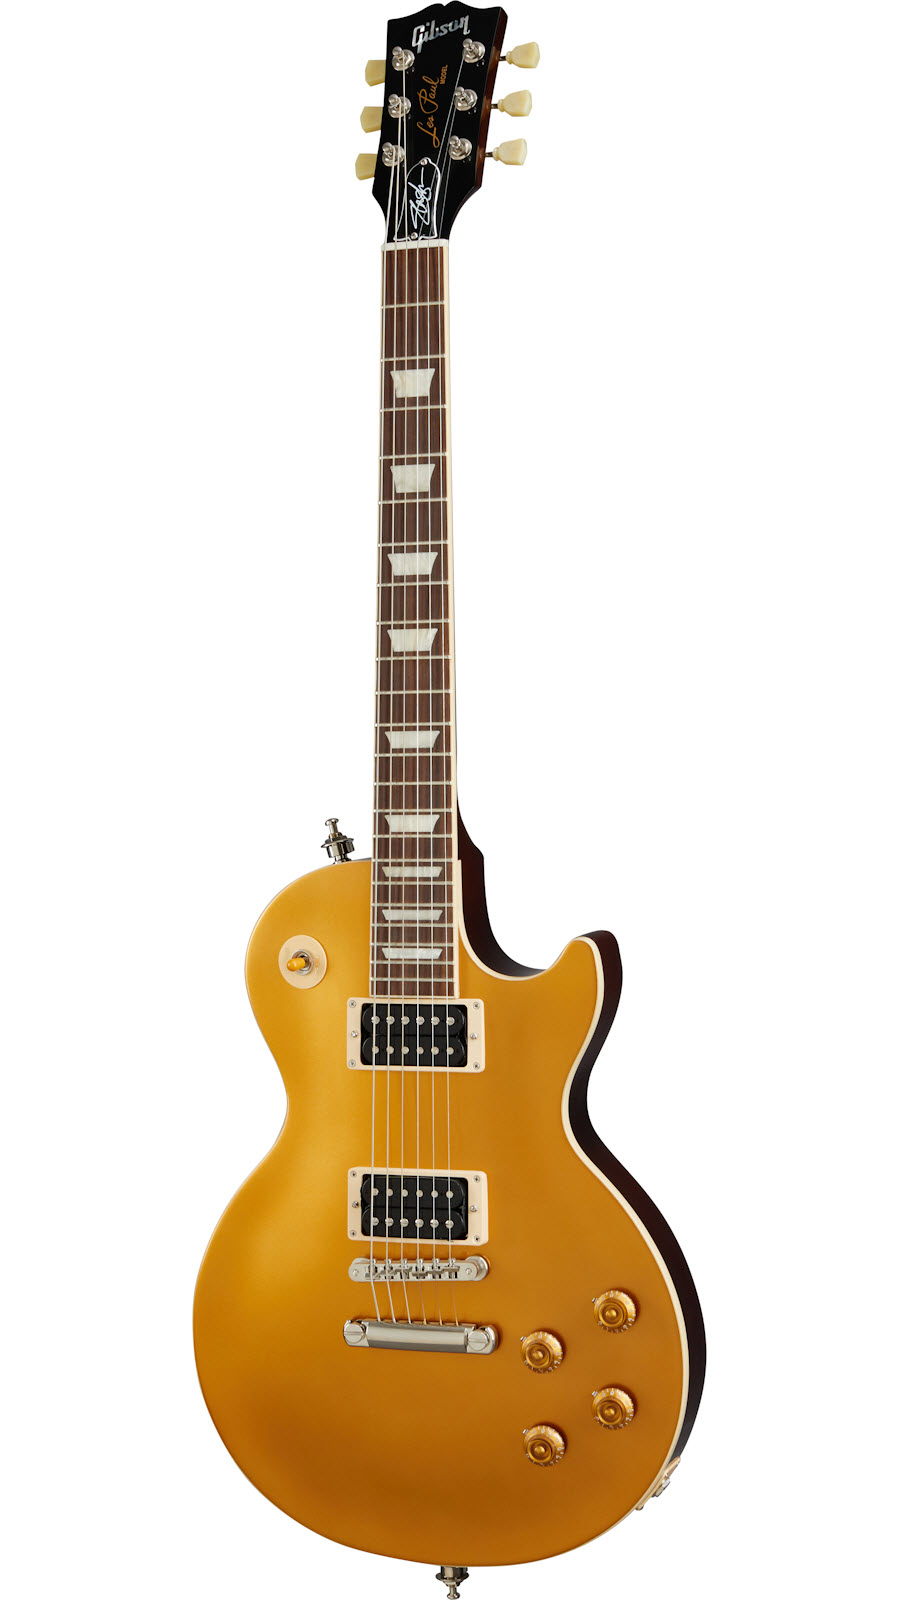 Gibson Les Paul Standard Slash Gold Top Limited Edition